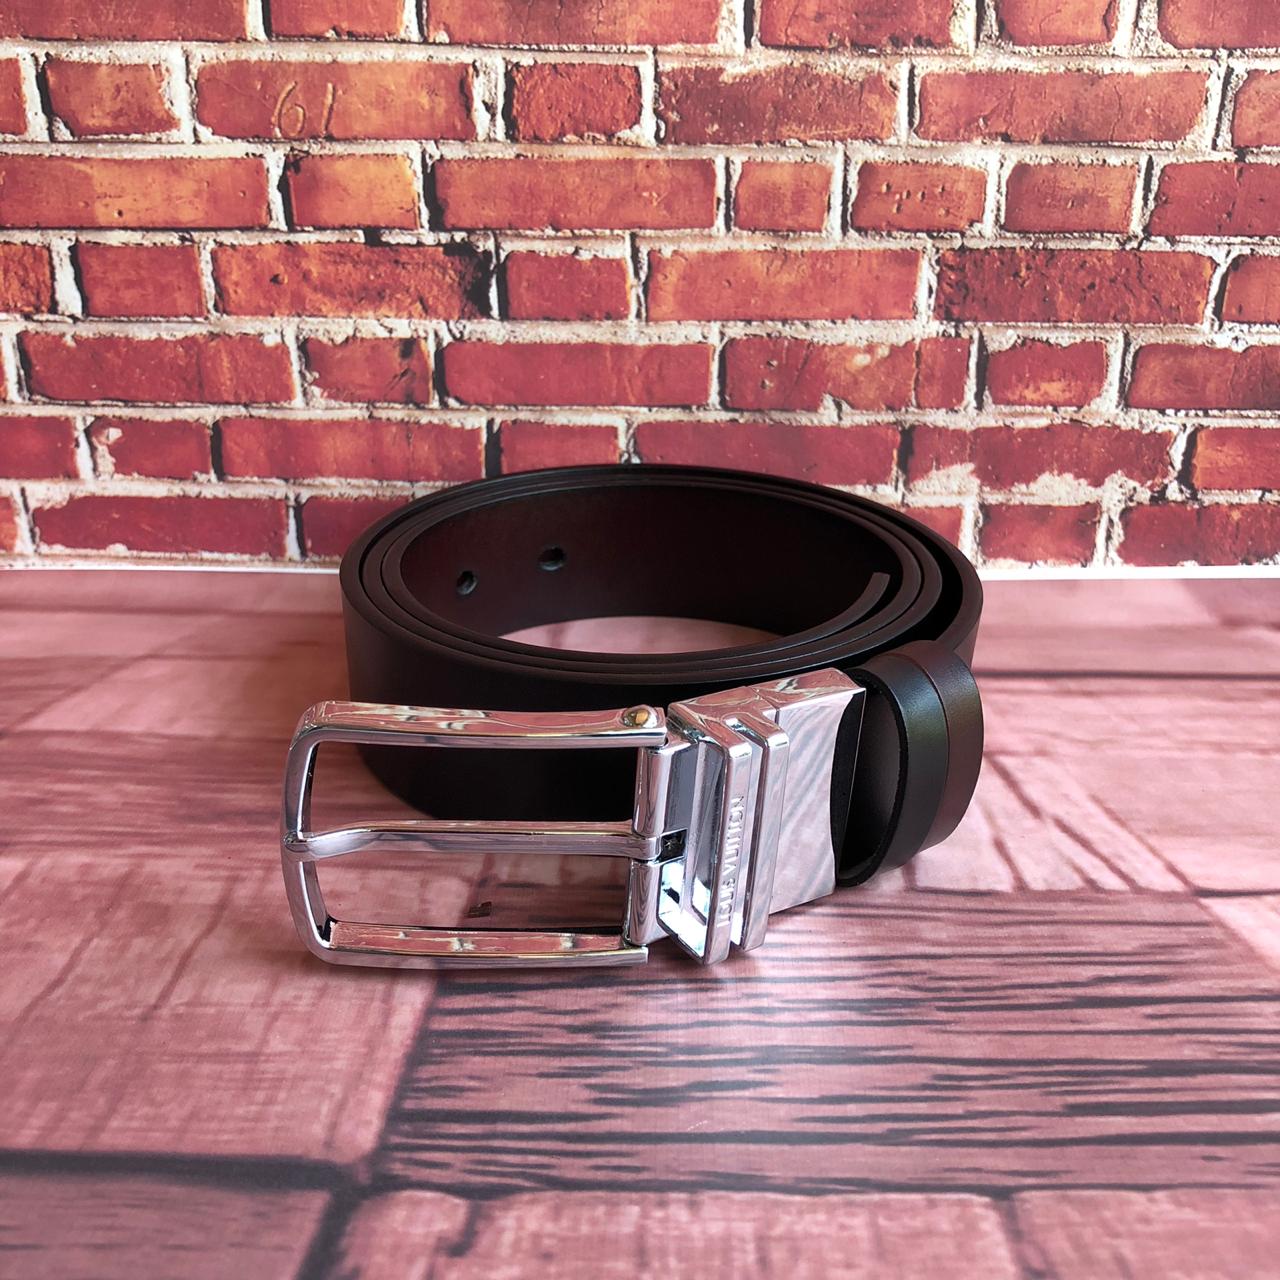 FunkyTradition Black and Brown Reversible Mens Leather Belts - FunkyTradition